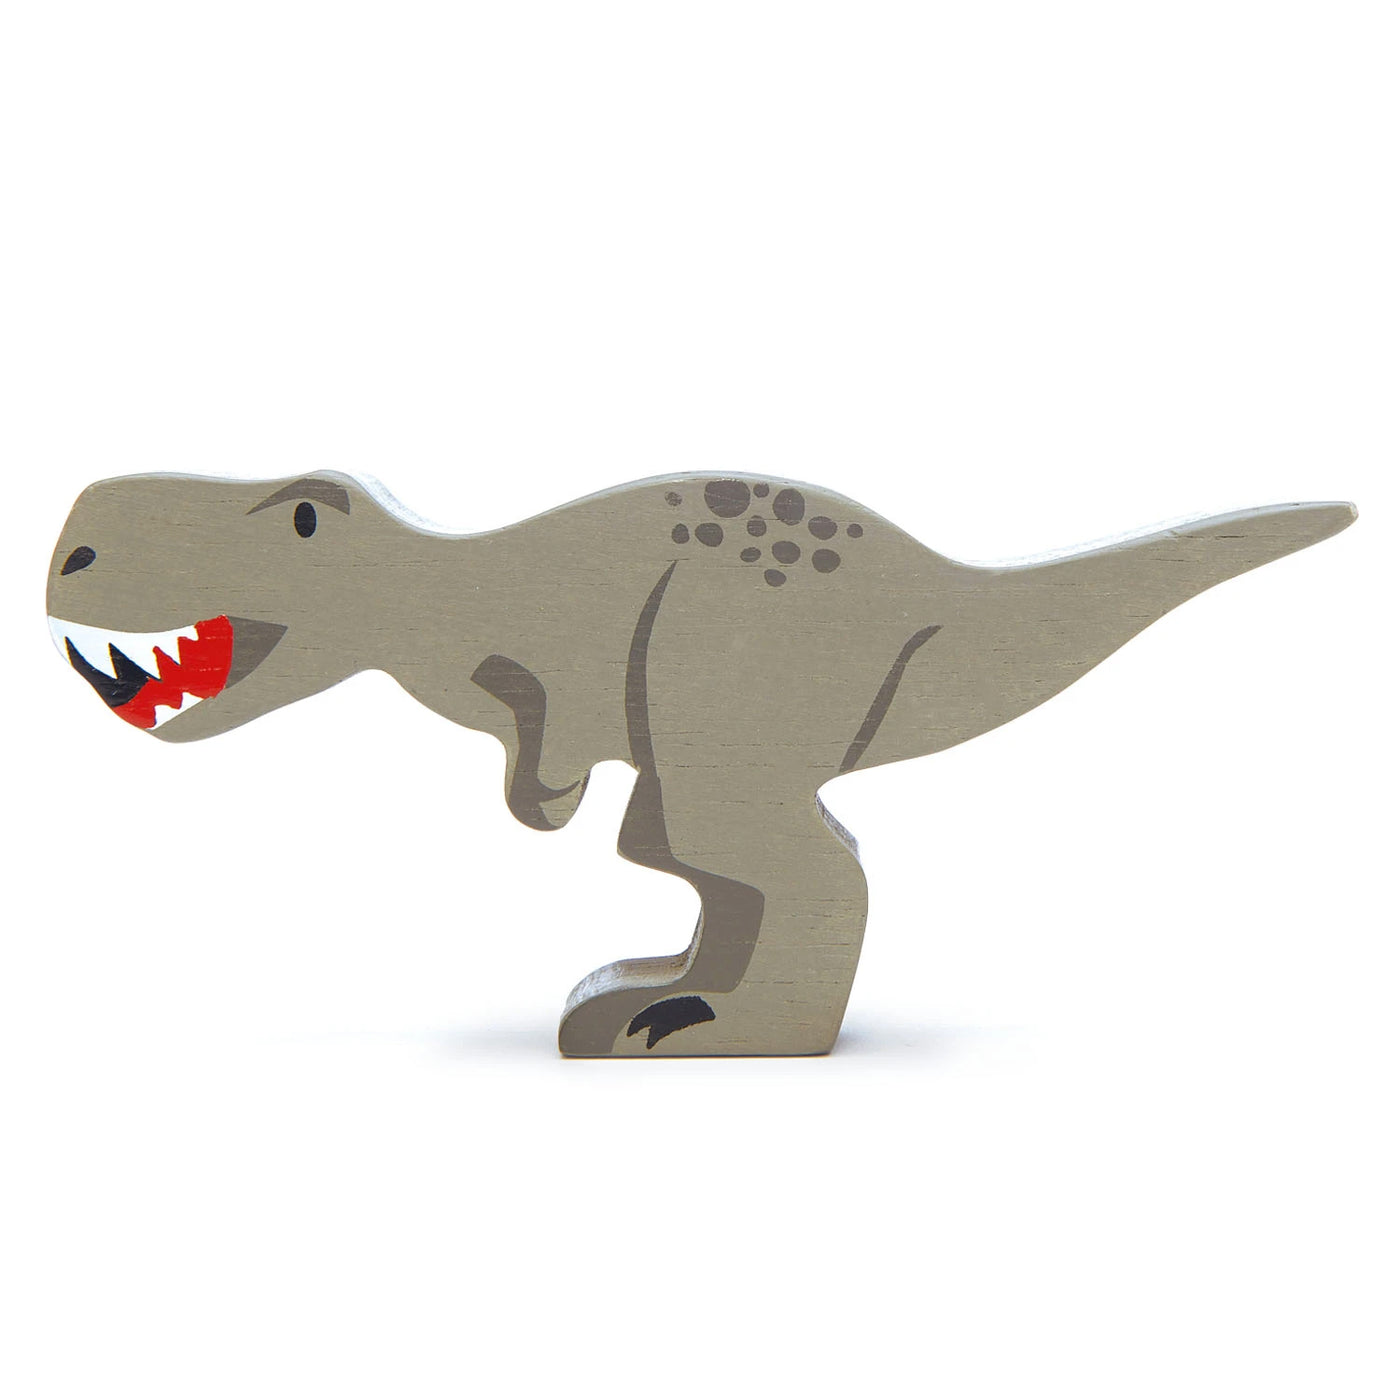 Wooden tyrannosaurus rex toy dinosaur for kids made of eco-friendly wood